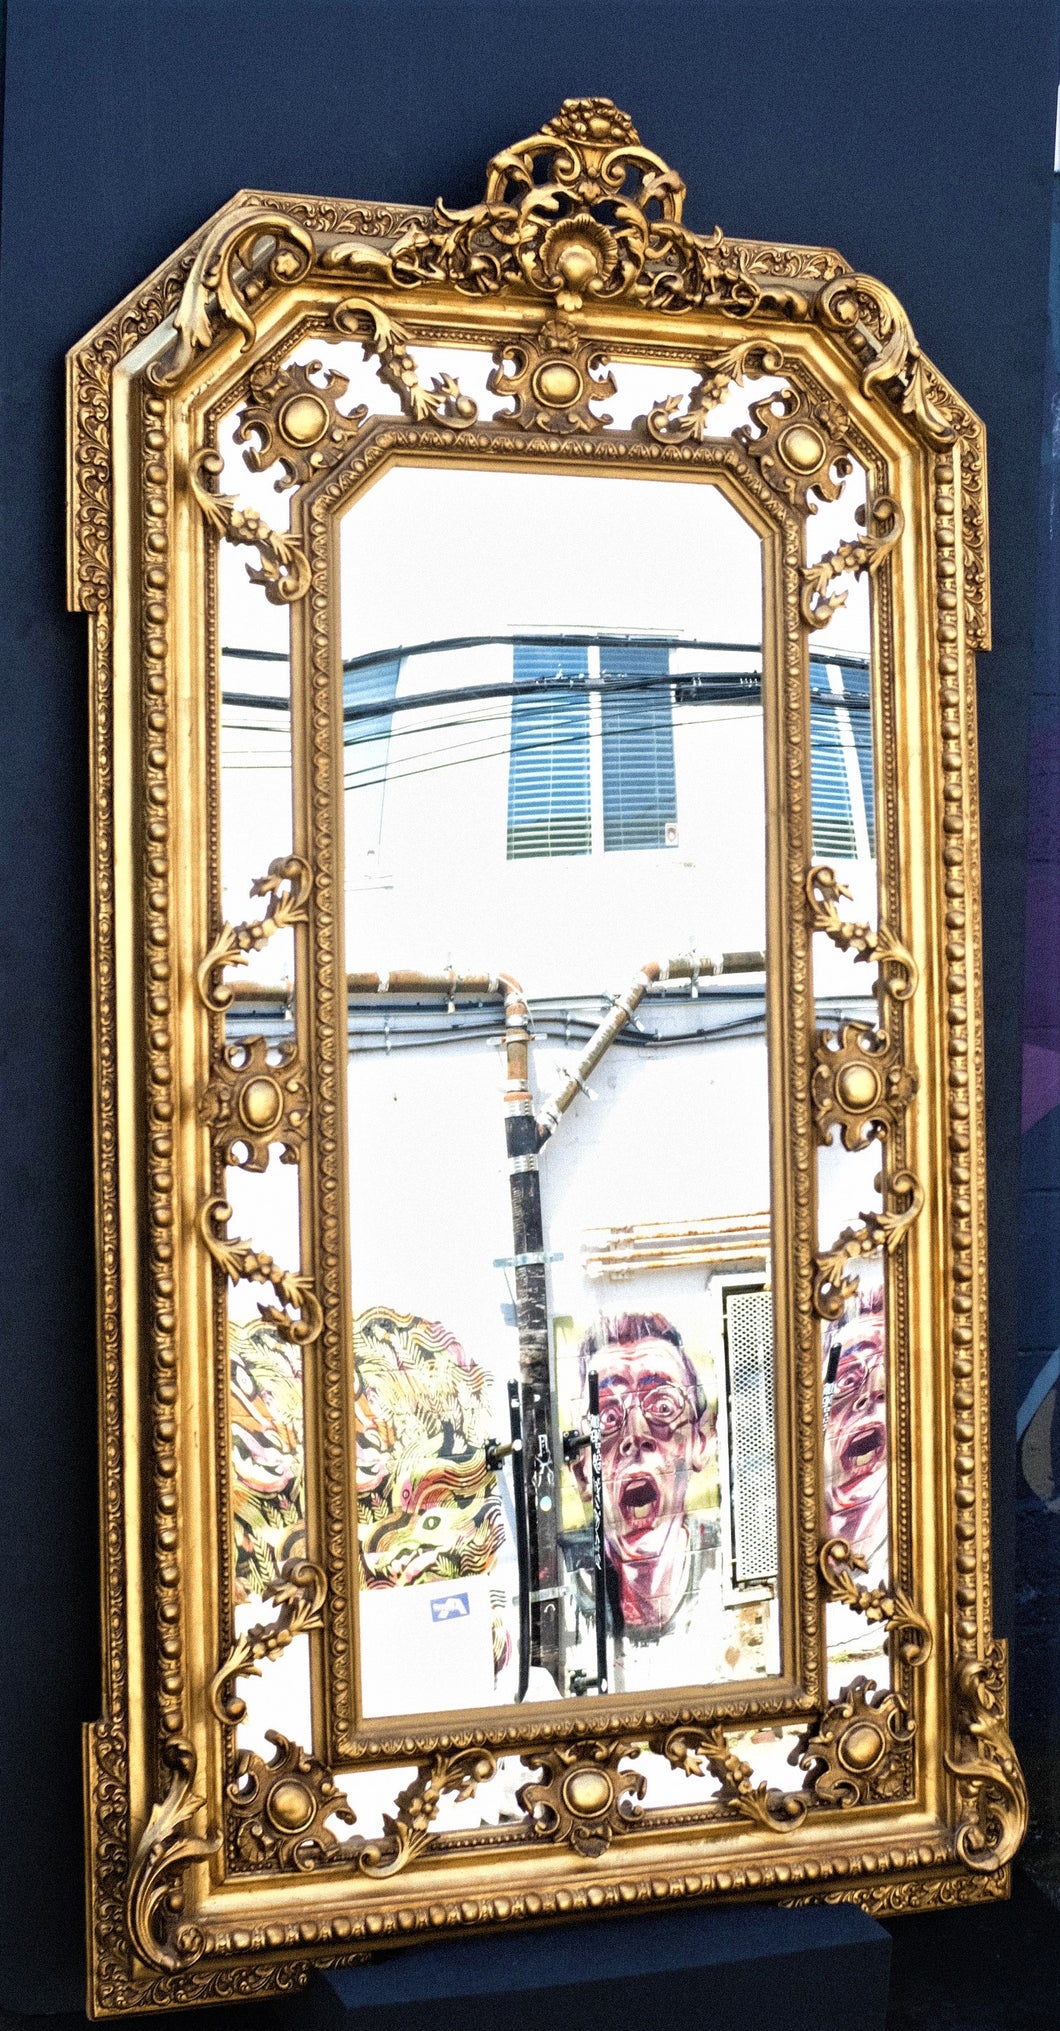 6001 Six and a Half Foot Tall Gilded Mirror With Treated Glass